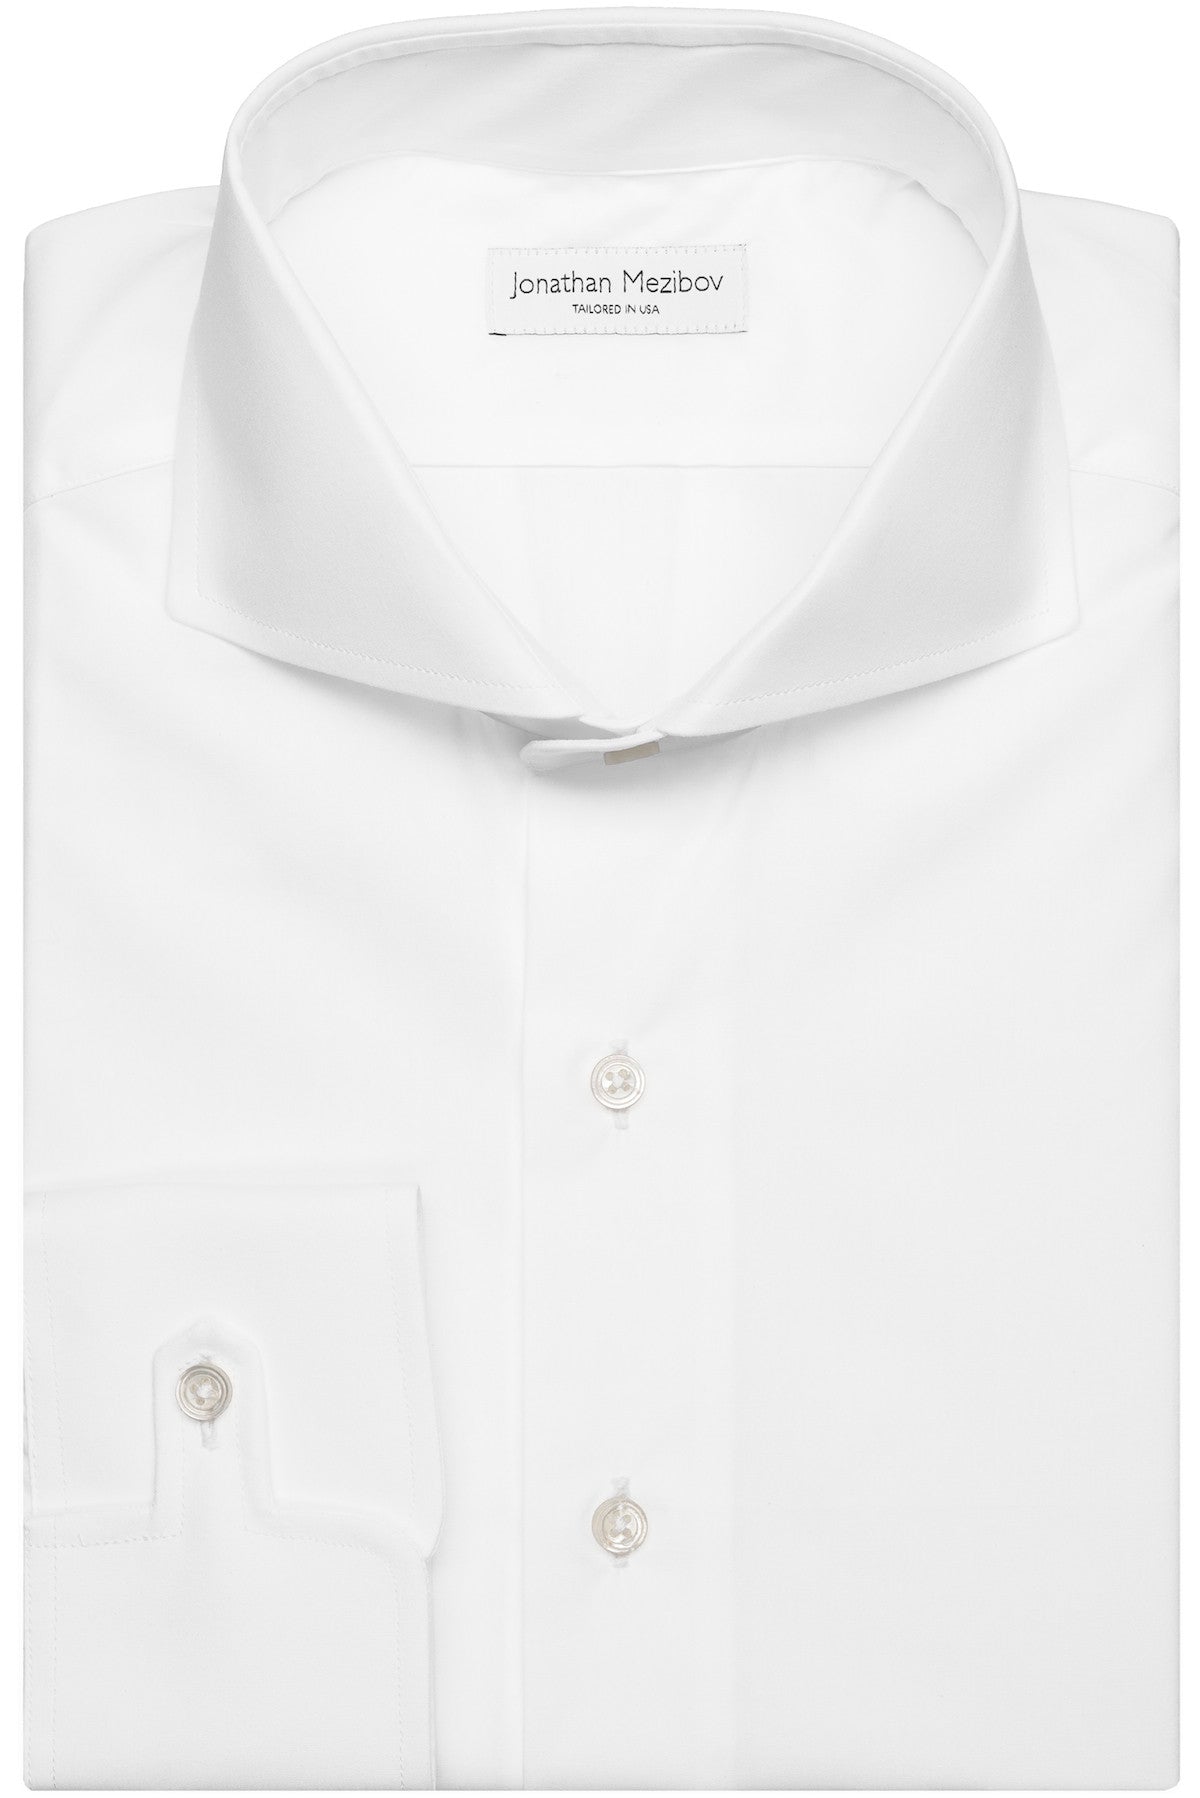 The Perfect White Shirt for Women